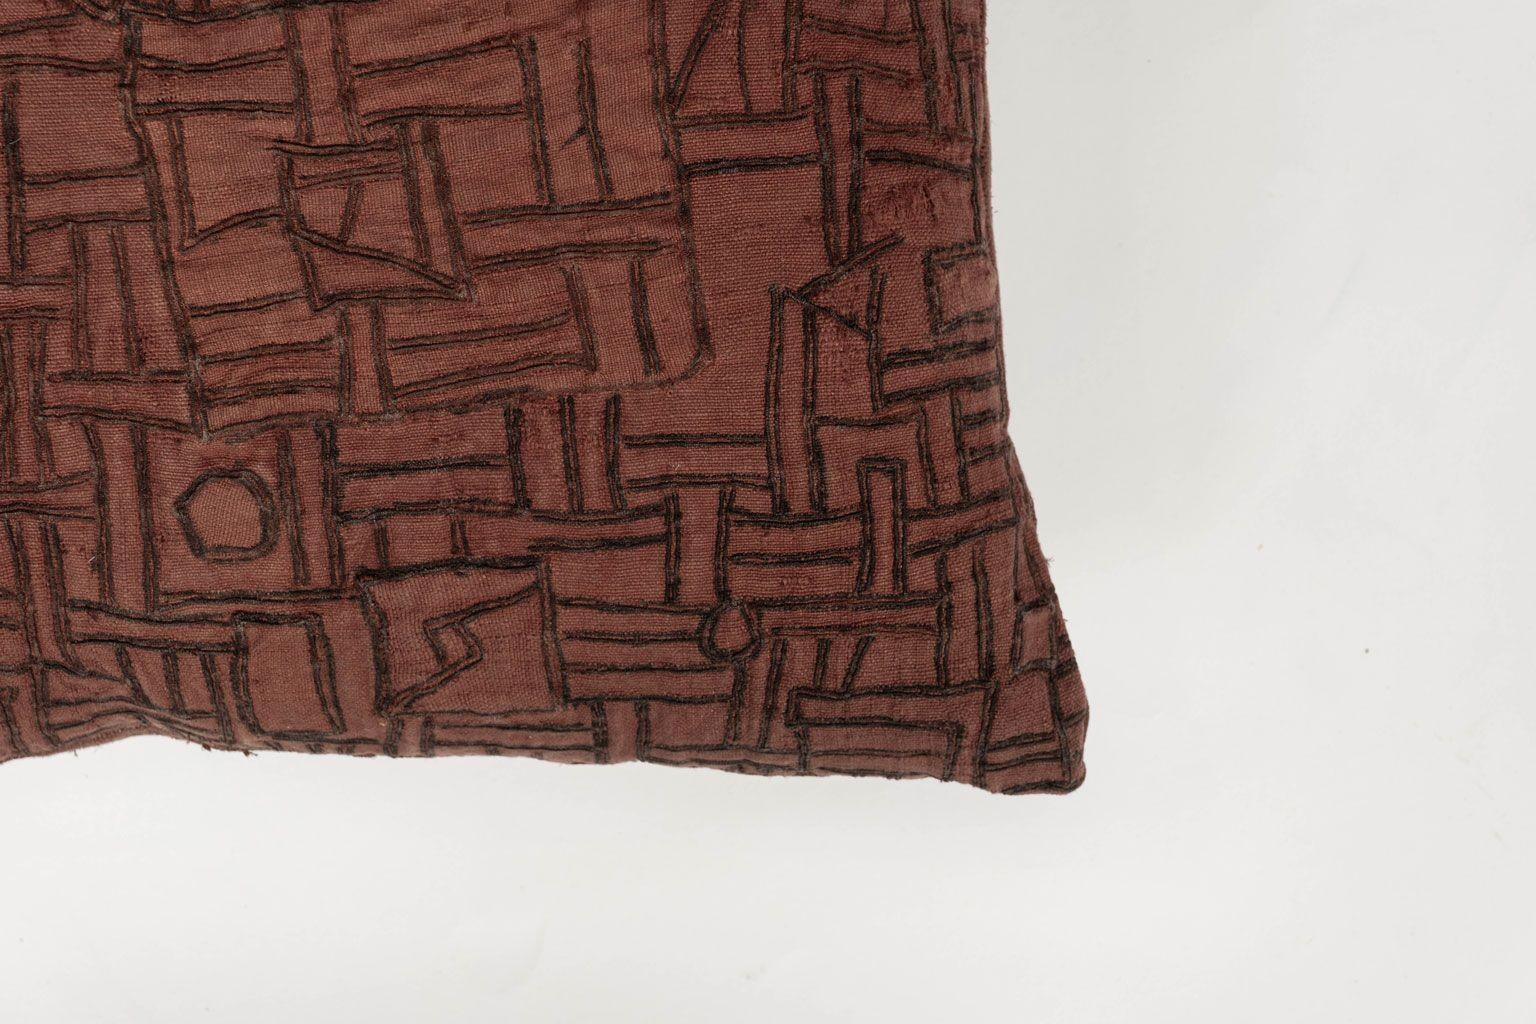 Wonderful large faded plum-color embroidered cushion made from an antique handwoven and hand-dyed cotton tribal textile (circa 1930-1954). Hand-sewn into gorgeous large square decorative pillow that includes a zip fastener and feather insert. Two